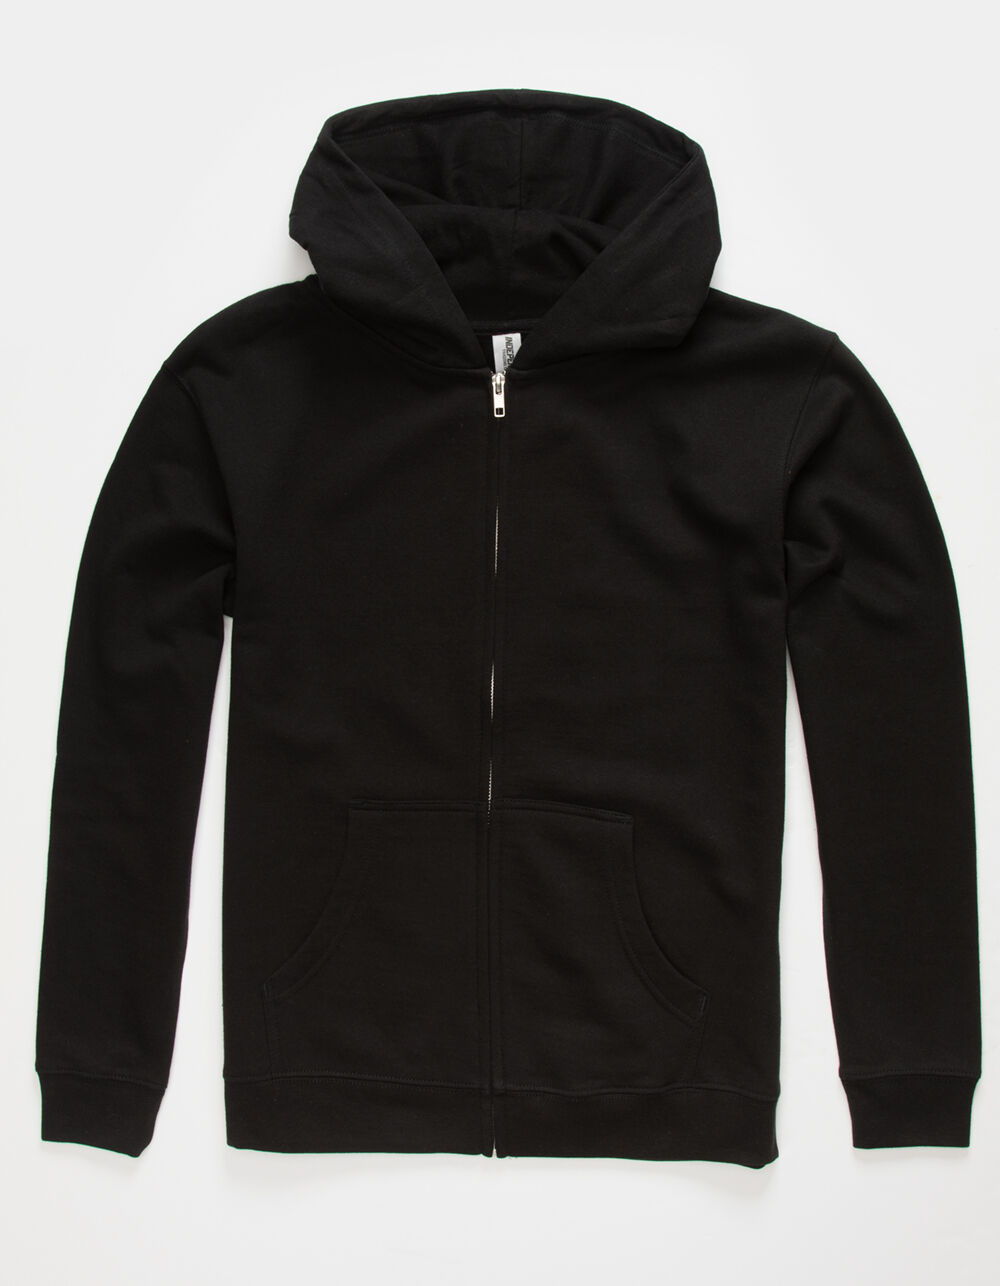 INDEPENDENT TRADING COMPANY Boys Solid Black Zip Hoodie - BLACK | Tillys